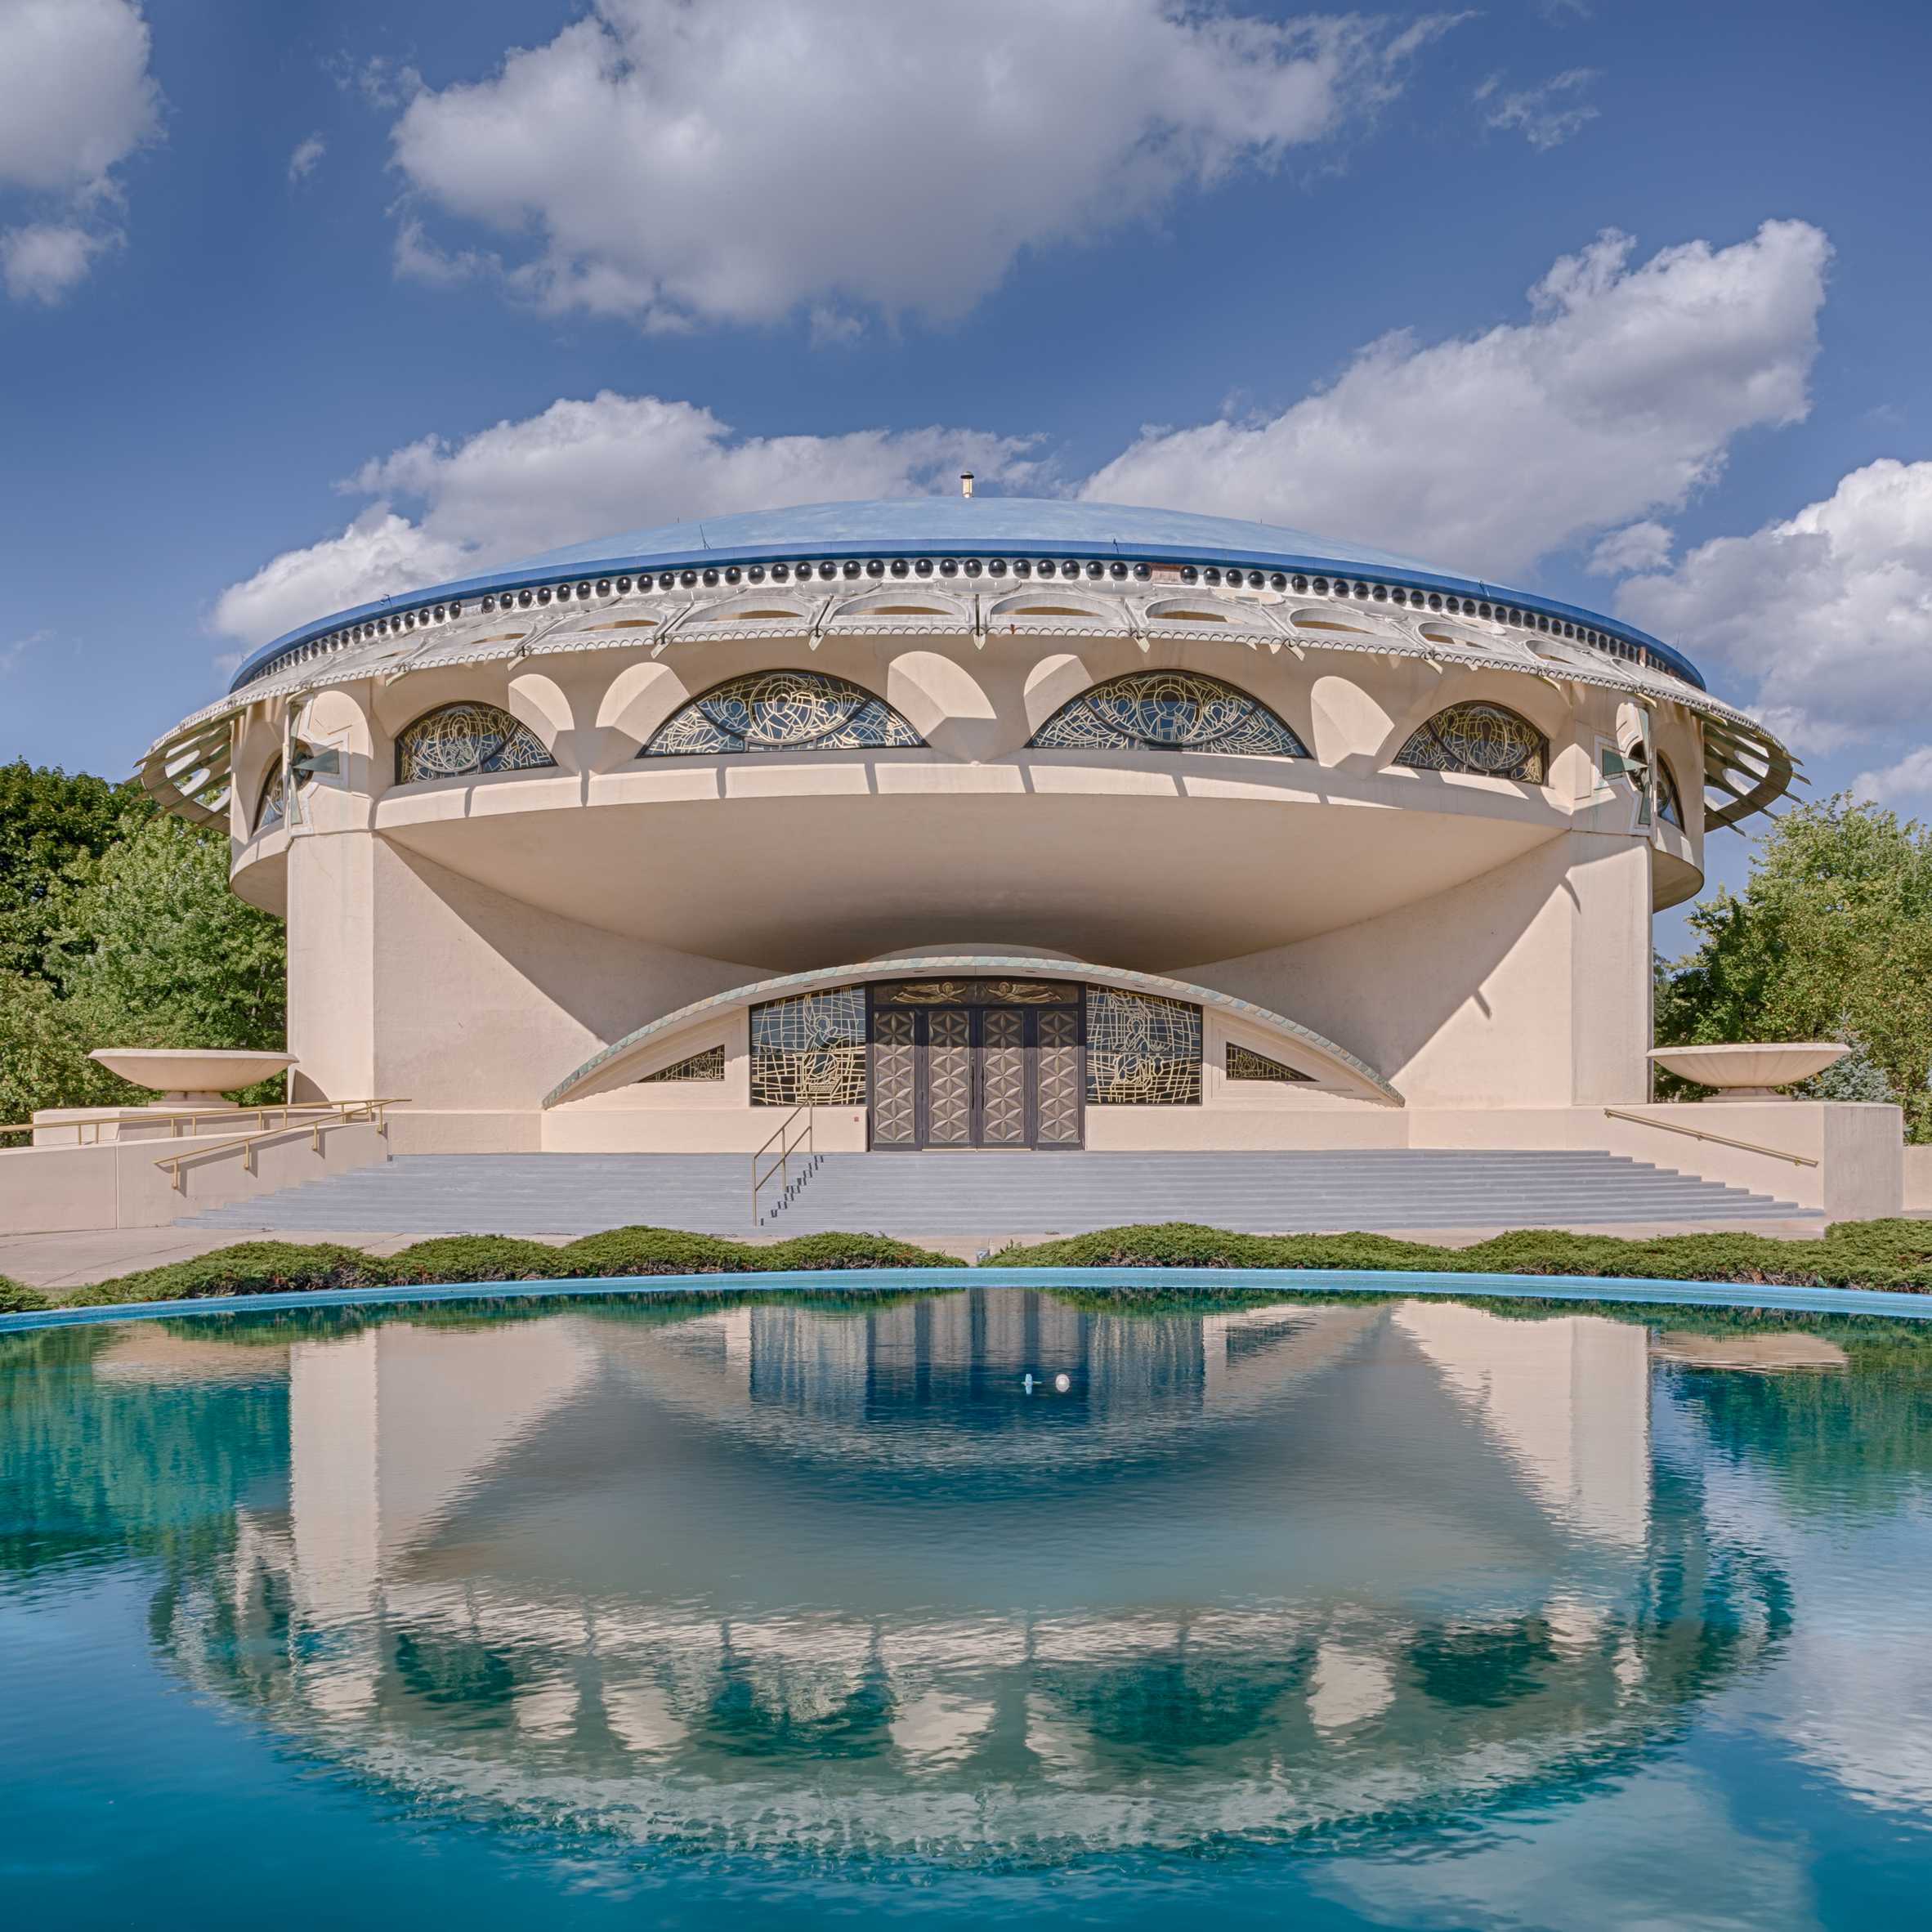 Frank Lloyd Wright's lesser-known designs are captured in new images-0